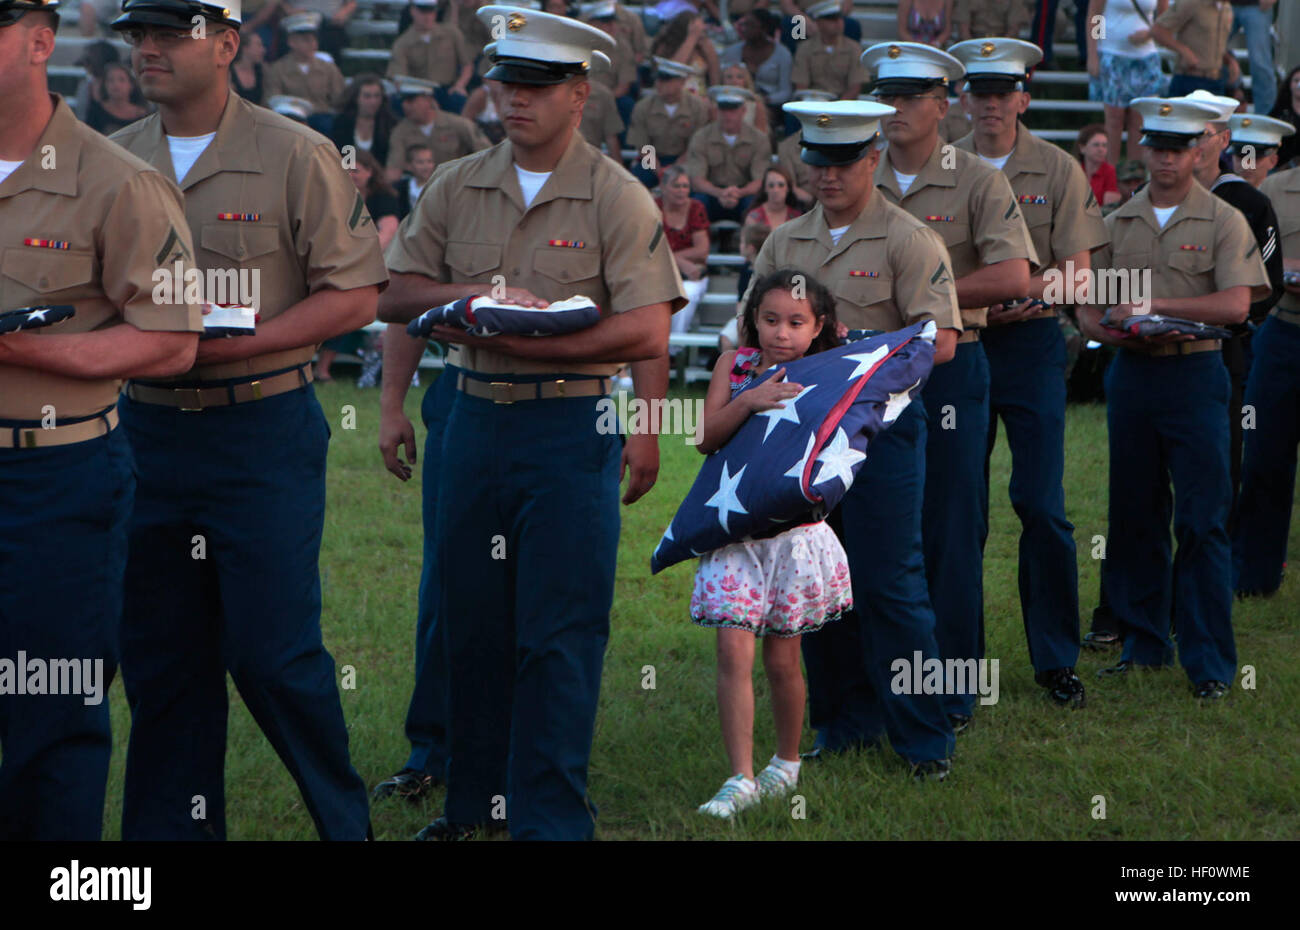 The daughter of a 2nd Low Altitude Air Defense Battalion Marine carries an American flag to a ceremonial fire here. The U.S. Flag Code dictates that, 'The flag, when it is in such condition that it is no longer a fitting emblem for display, should be destroyed in a dignified way, preferably by burning.' Marine Corps Air Station Cherry Point Year In Review 120614-M-EG384-163 Stock Photo